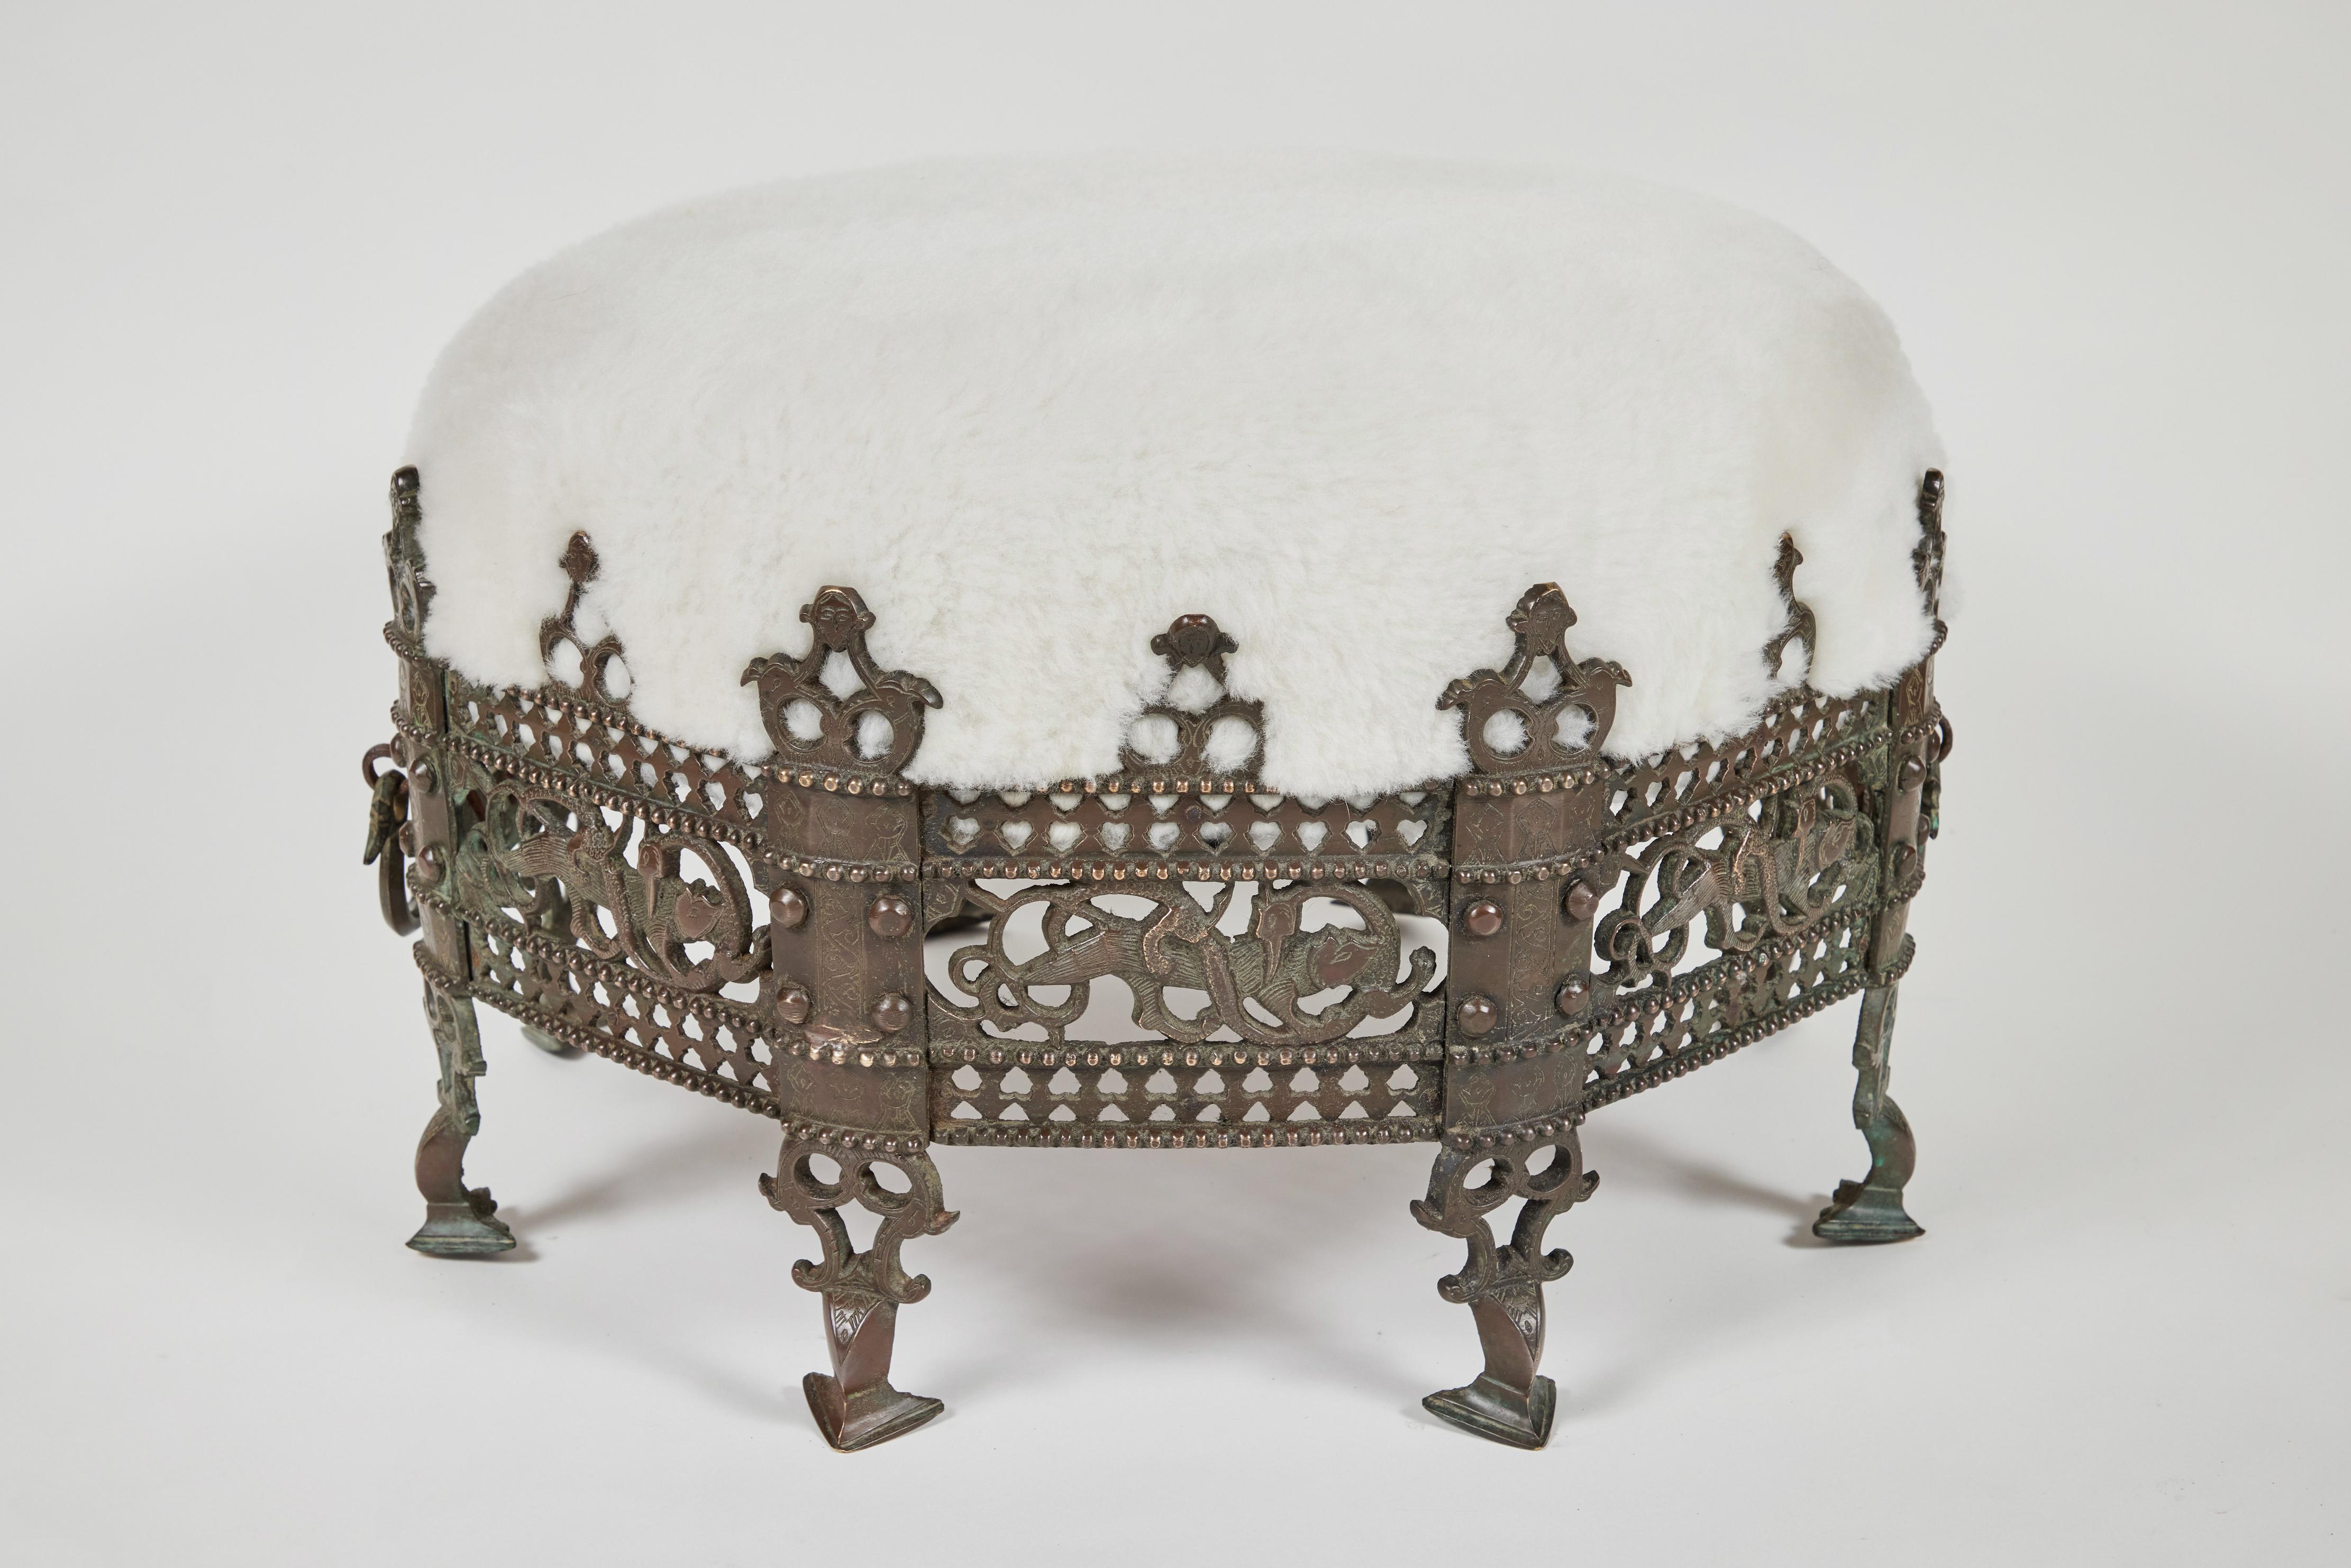 Did you see this one of a kind antique bronze footed intricately decorated 'Crown' framed stool with handles?
It is a very unique and stunning piece, has been newly upholstered in beautiful soft white shearling and is quite the special addition to